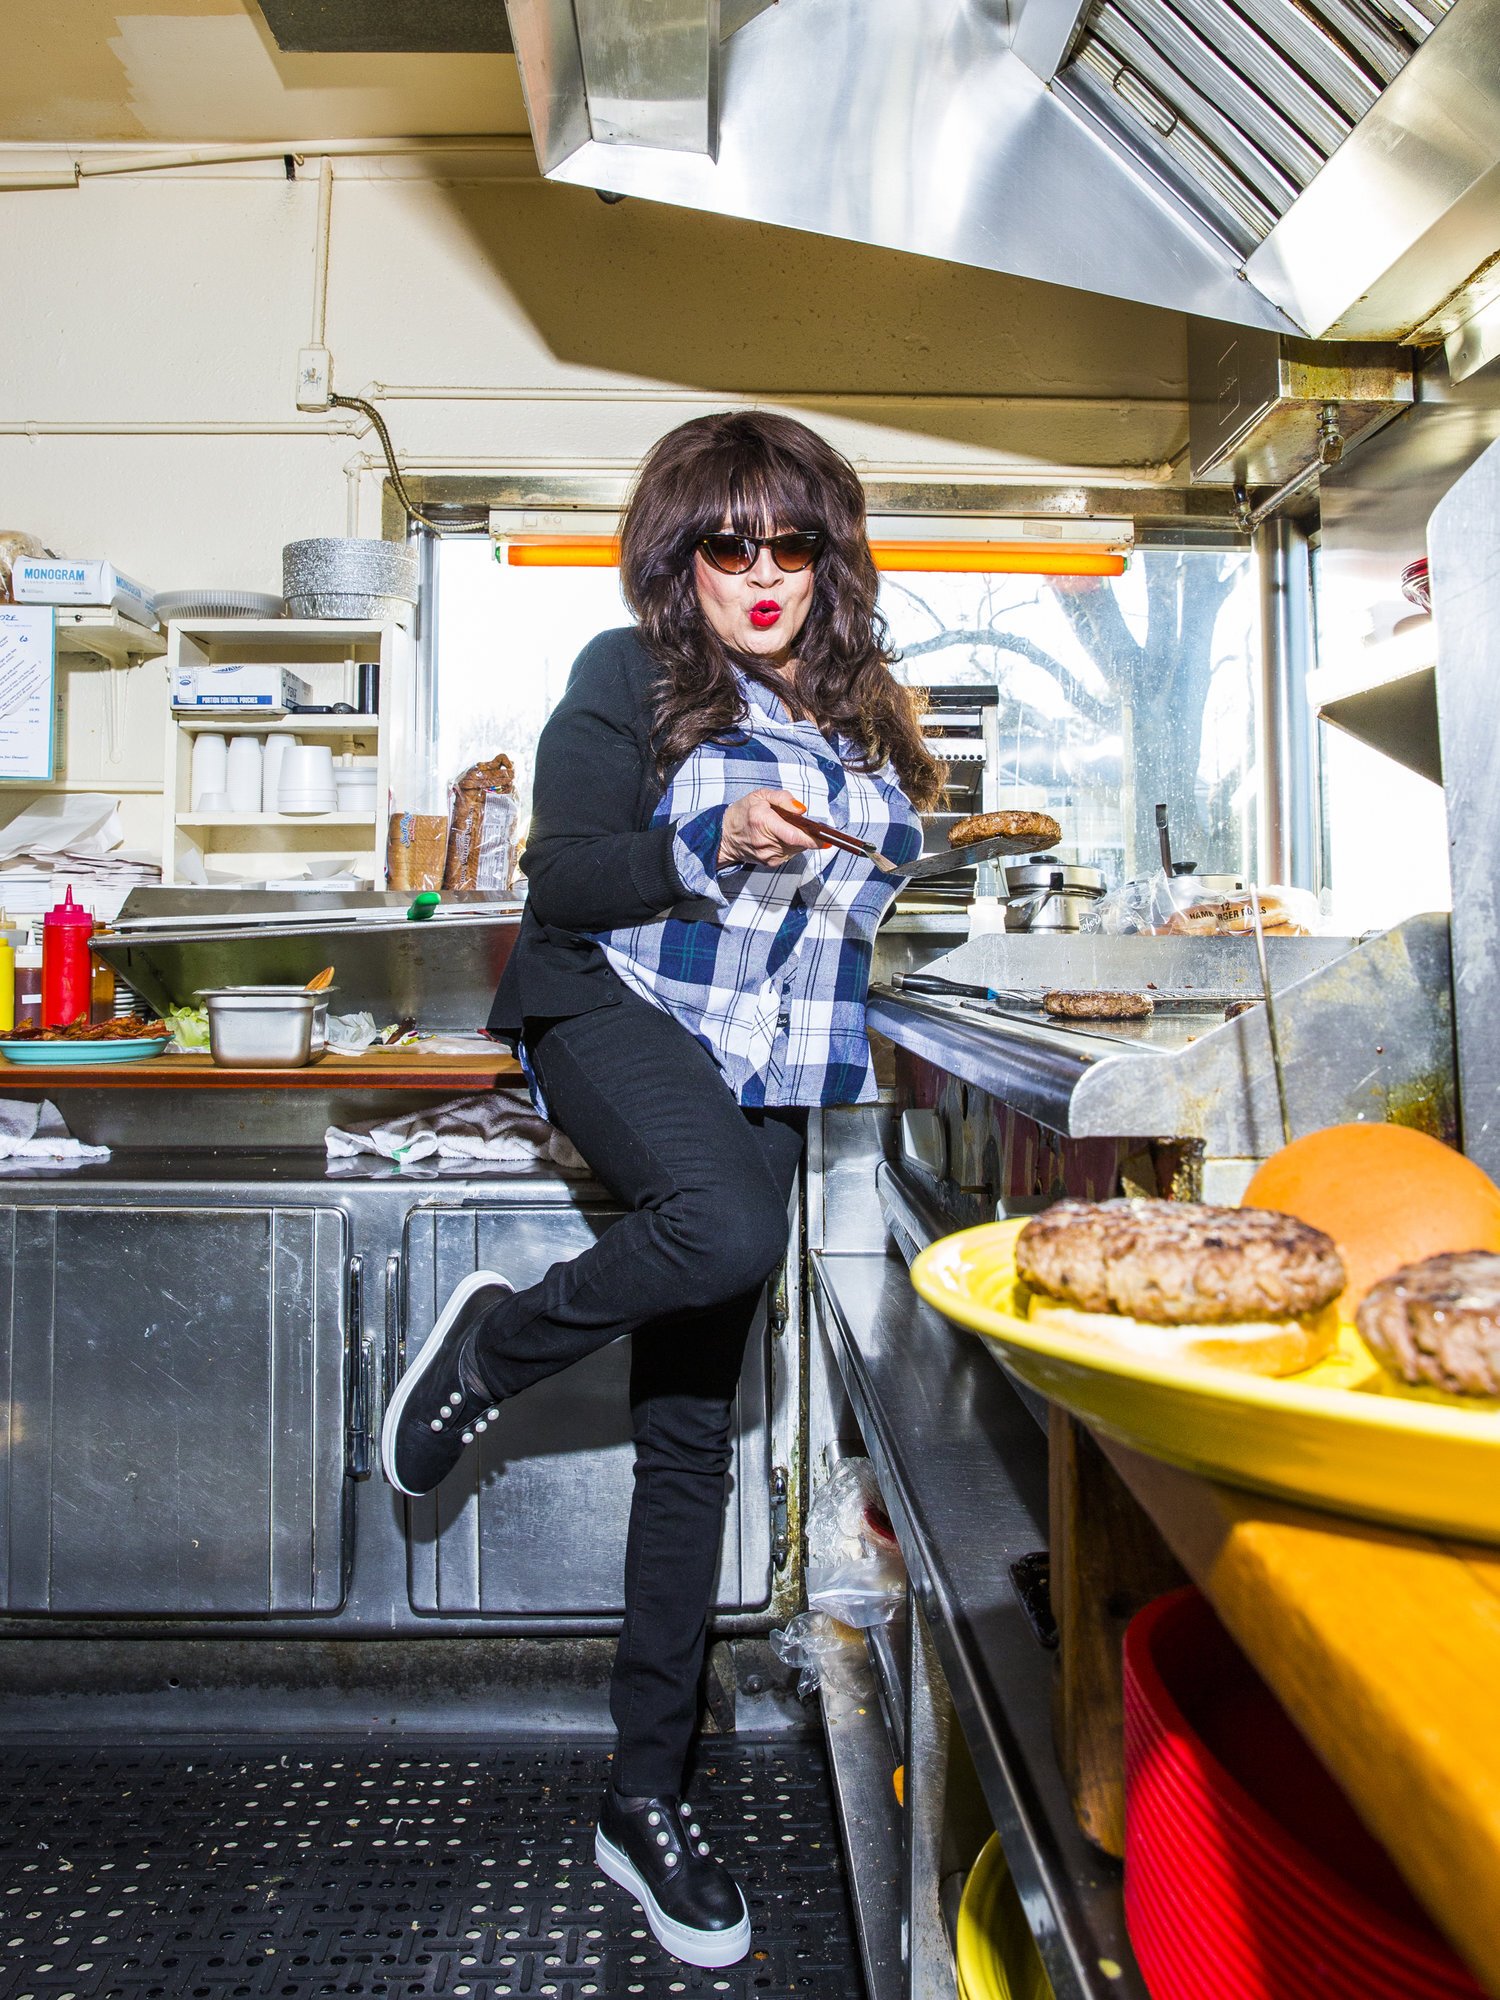  Ronnie Spector for AARP 